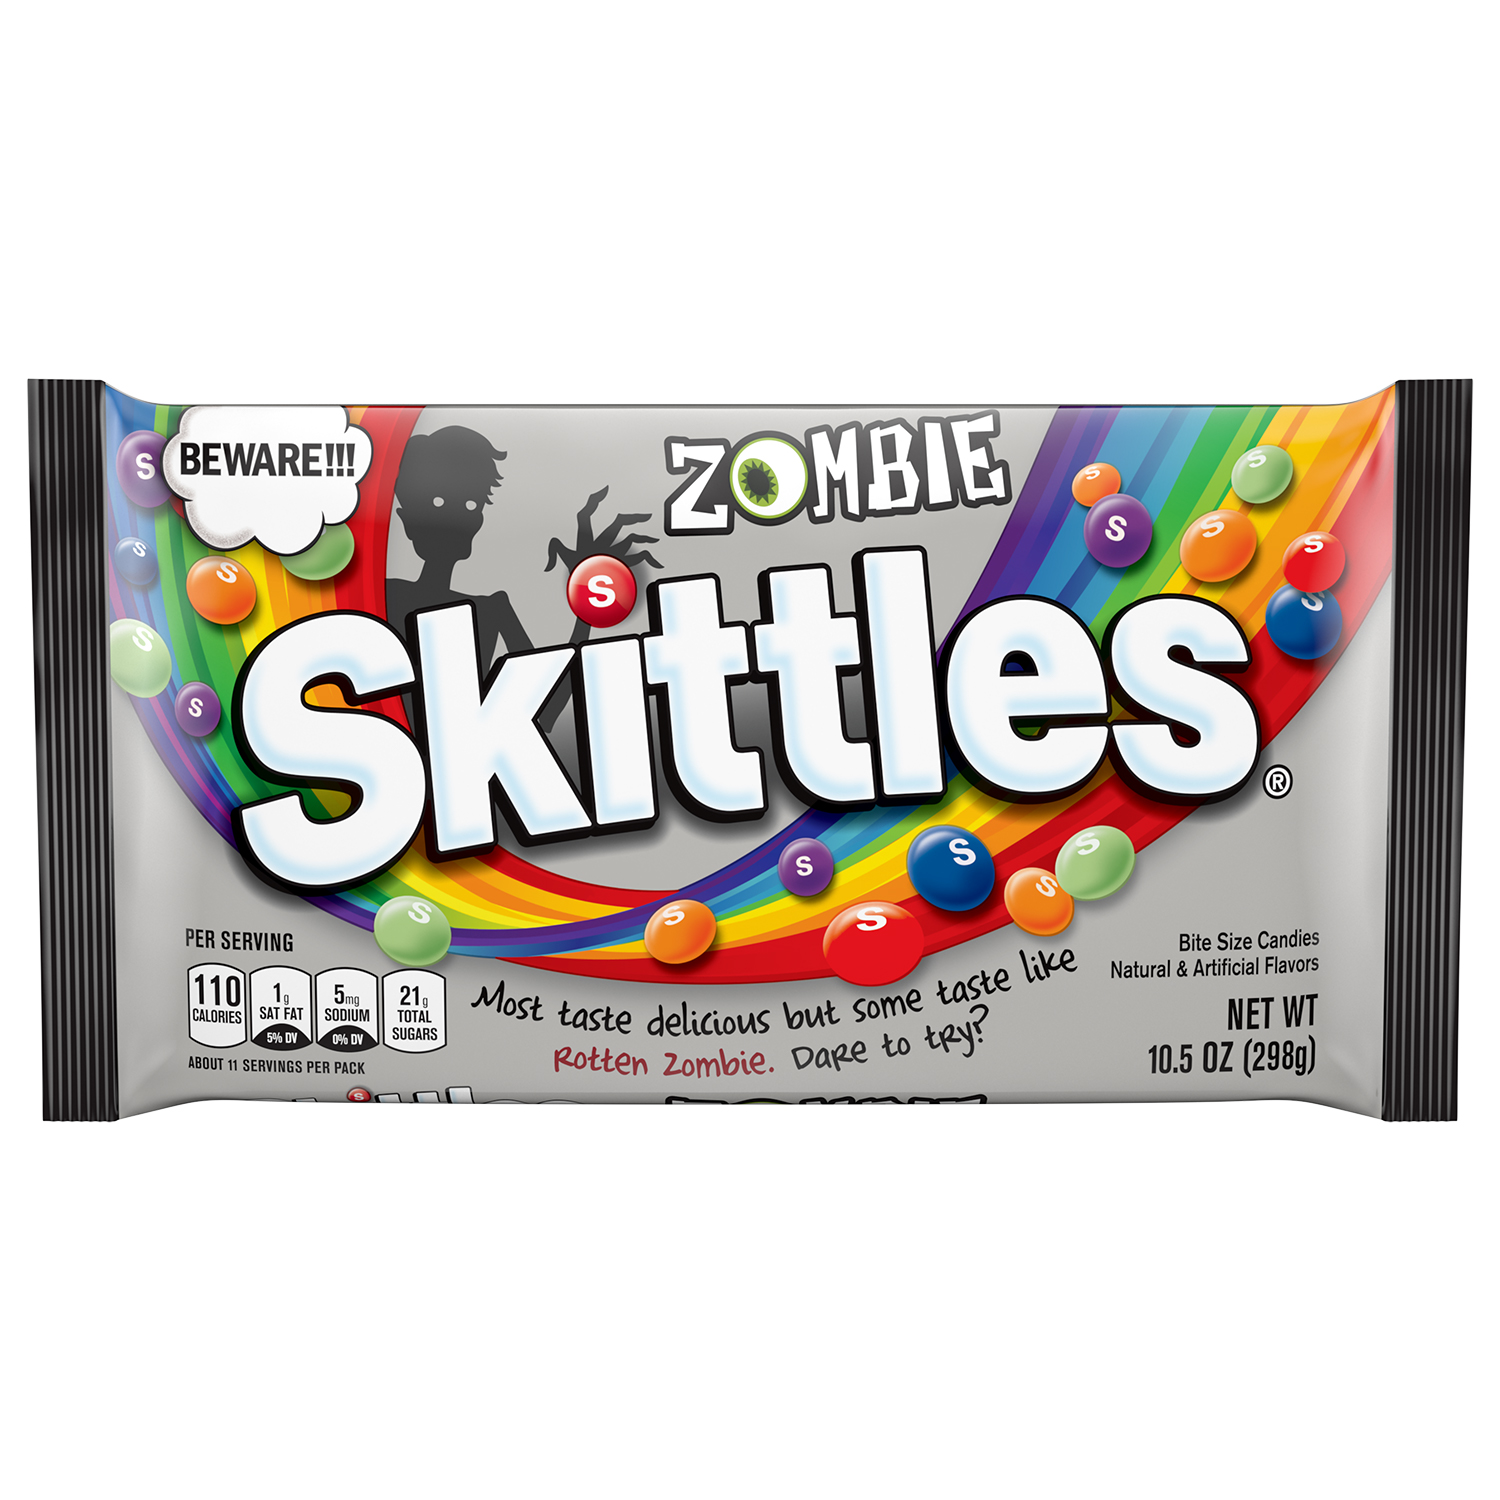 Zombie SKITTLES Halloween Candy, 10.5-Ounce Bag - image 1 of 8